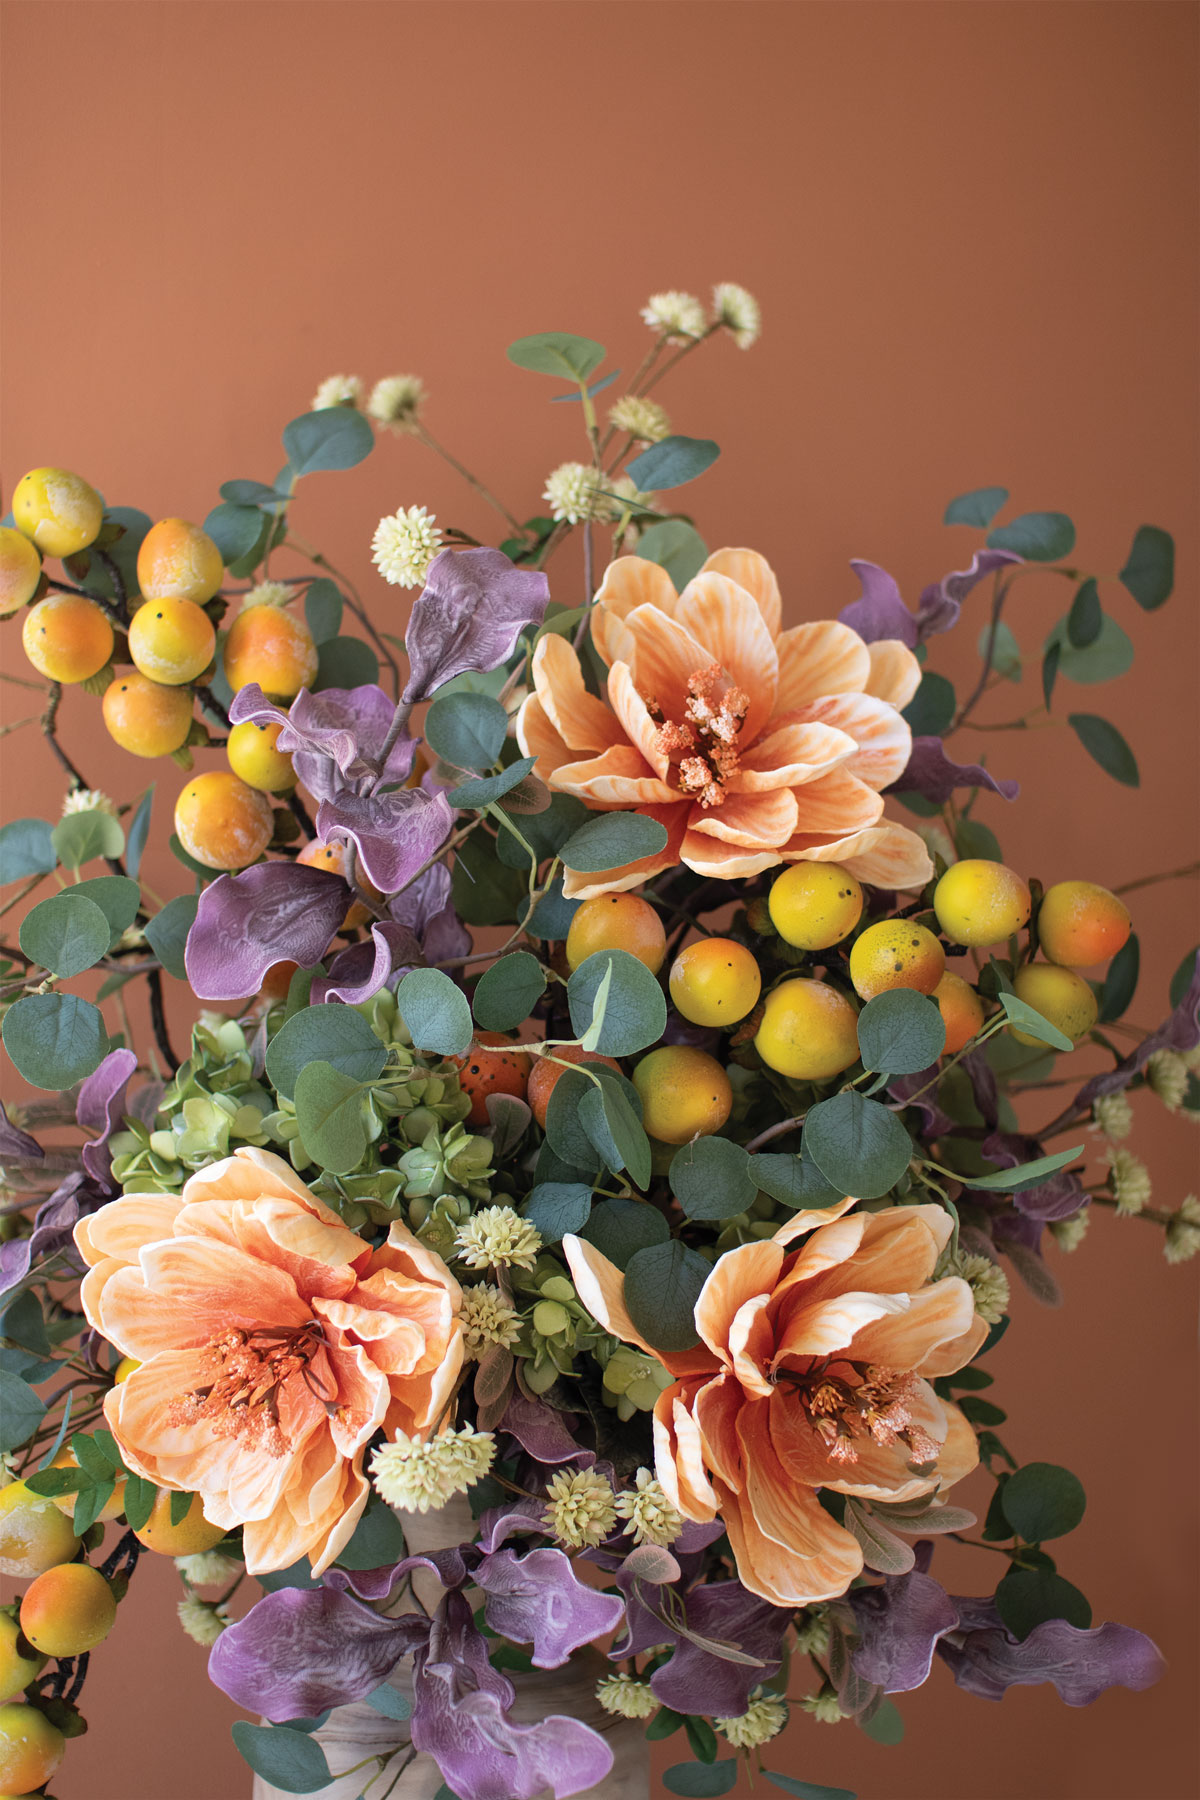 large purple and pale orange flowers, greenery, small white flowers, and small yellow and orange fruit in a vase